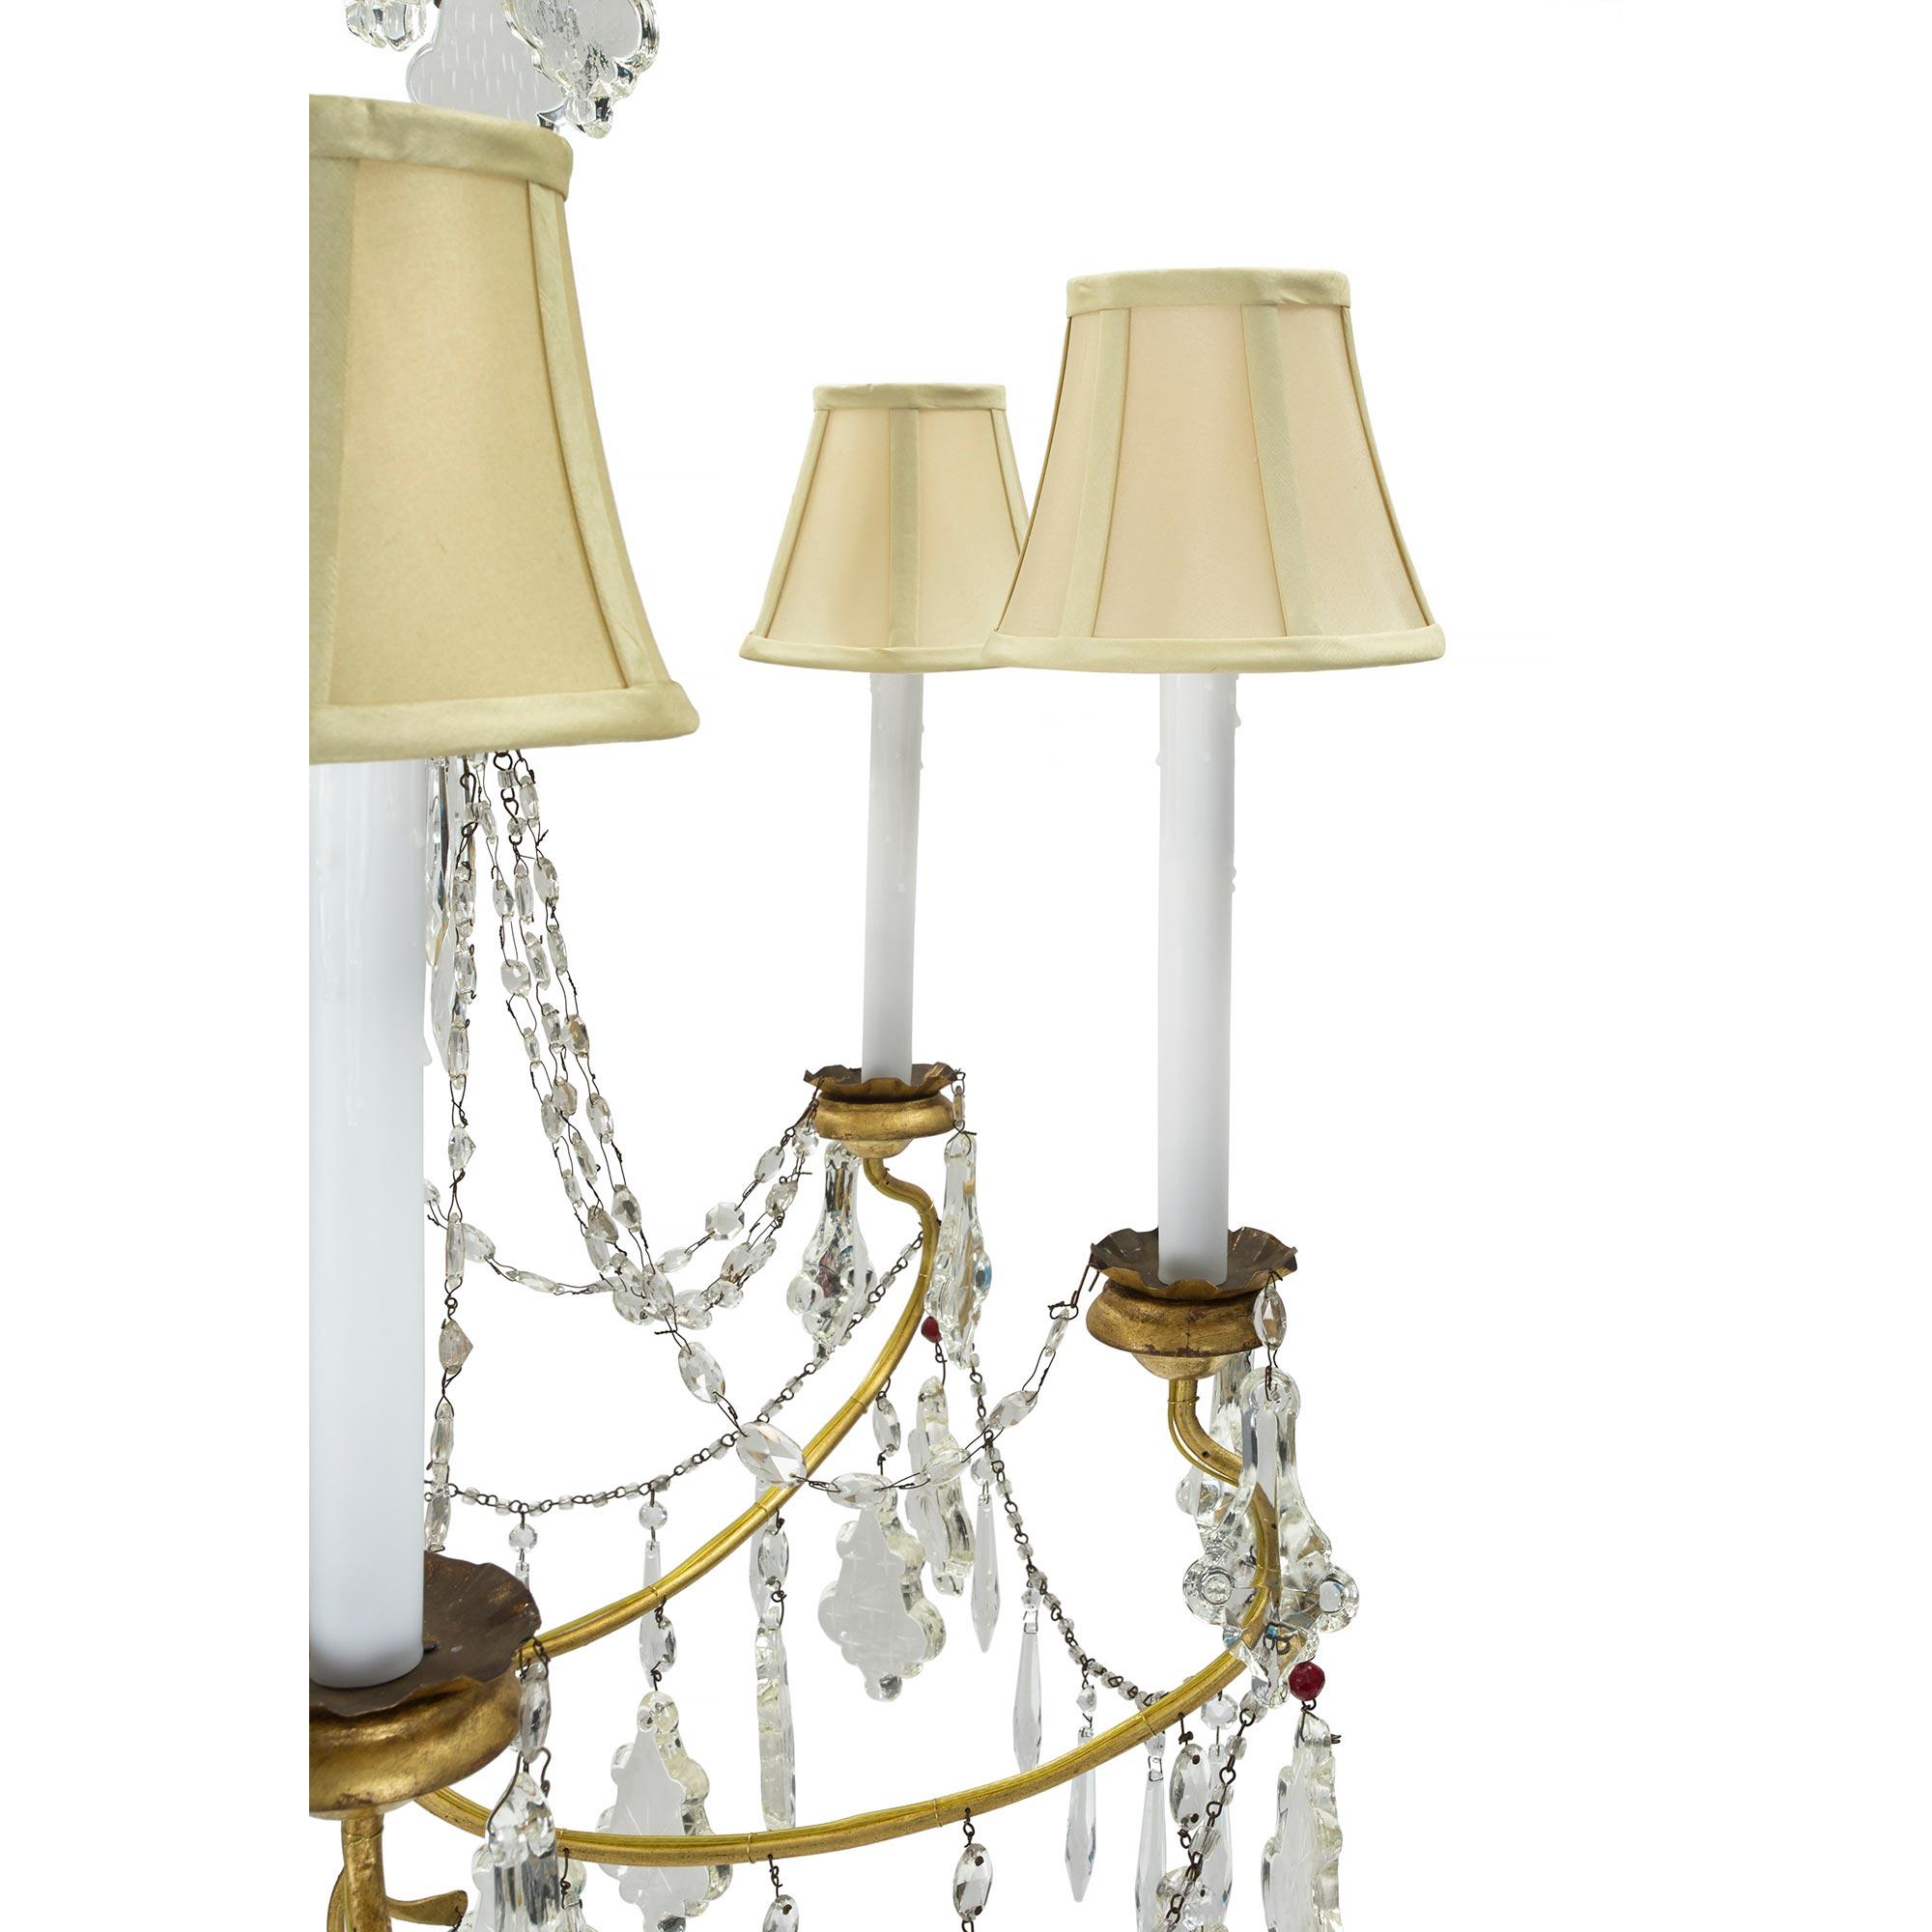 Italian 19th Century Six Light Gilt Metal, Giltwood and Crystal Genovese Chandel For Sale 2